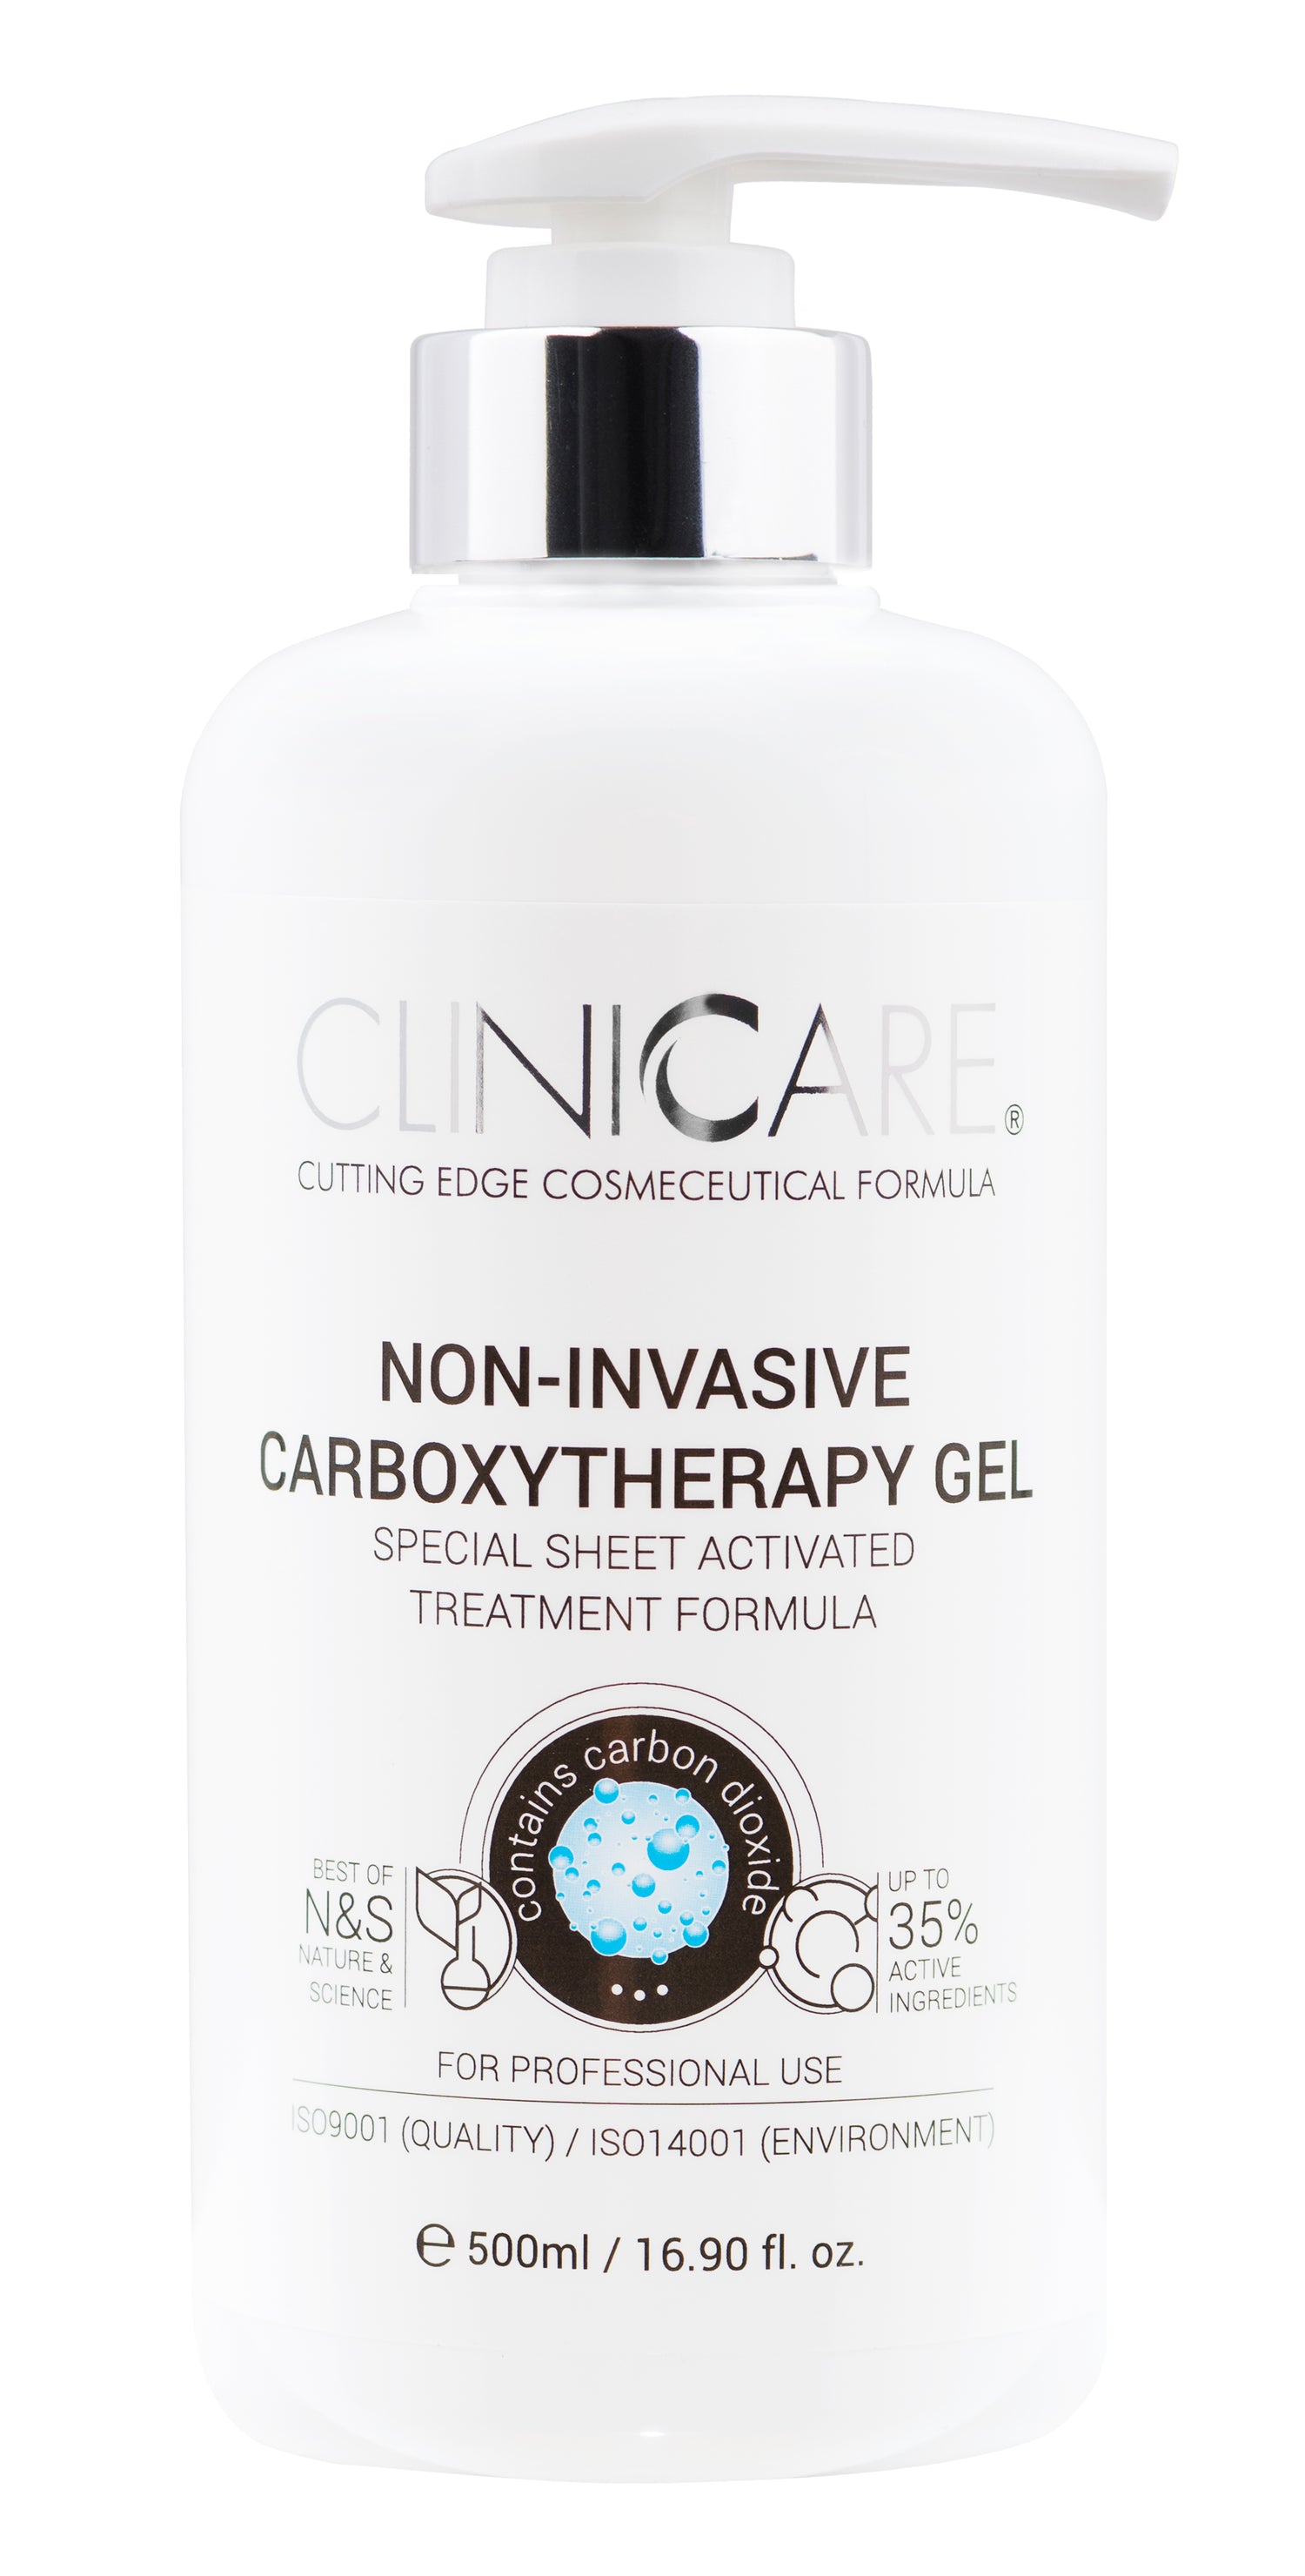 NON-INVASIVE CARBOXYTHERAPY GEL &amp; ACTIVATOR FACE MASK